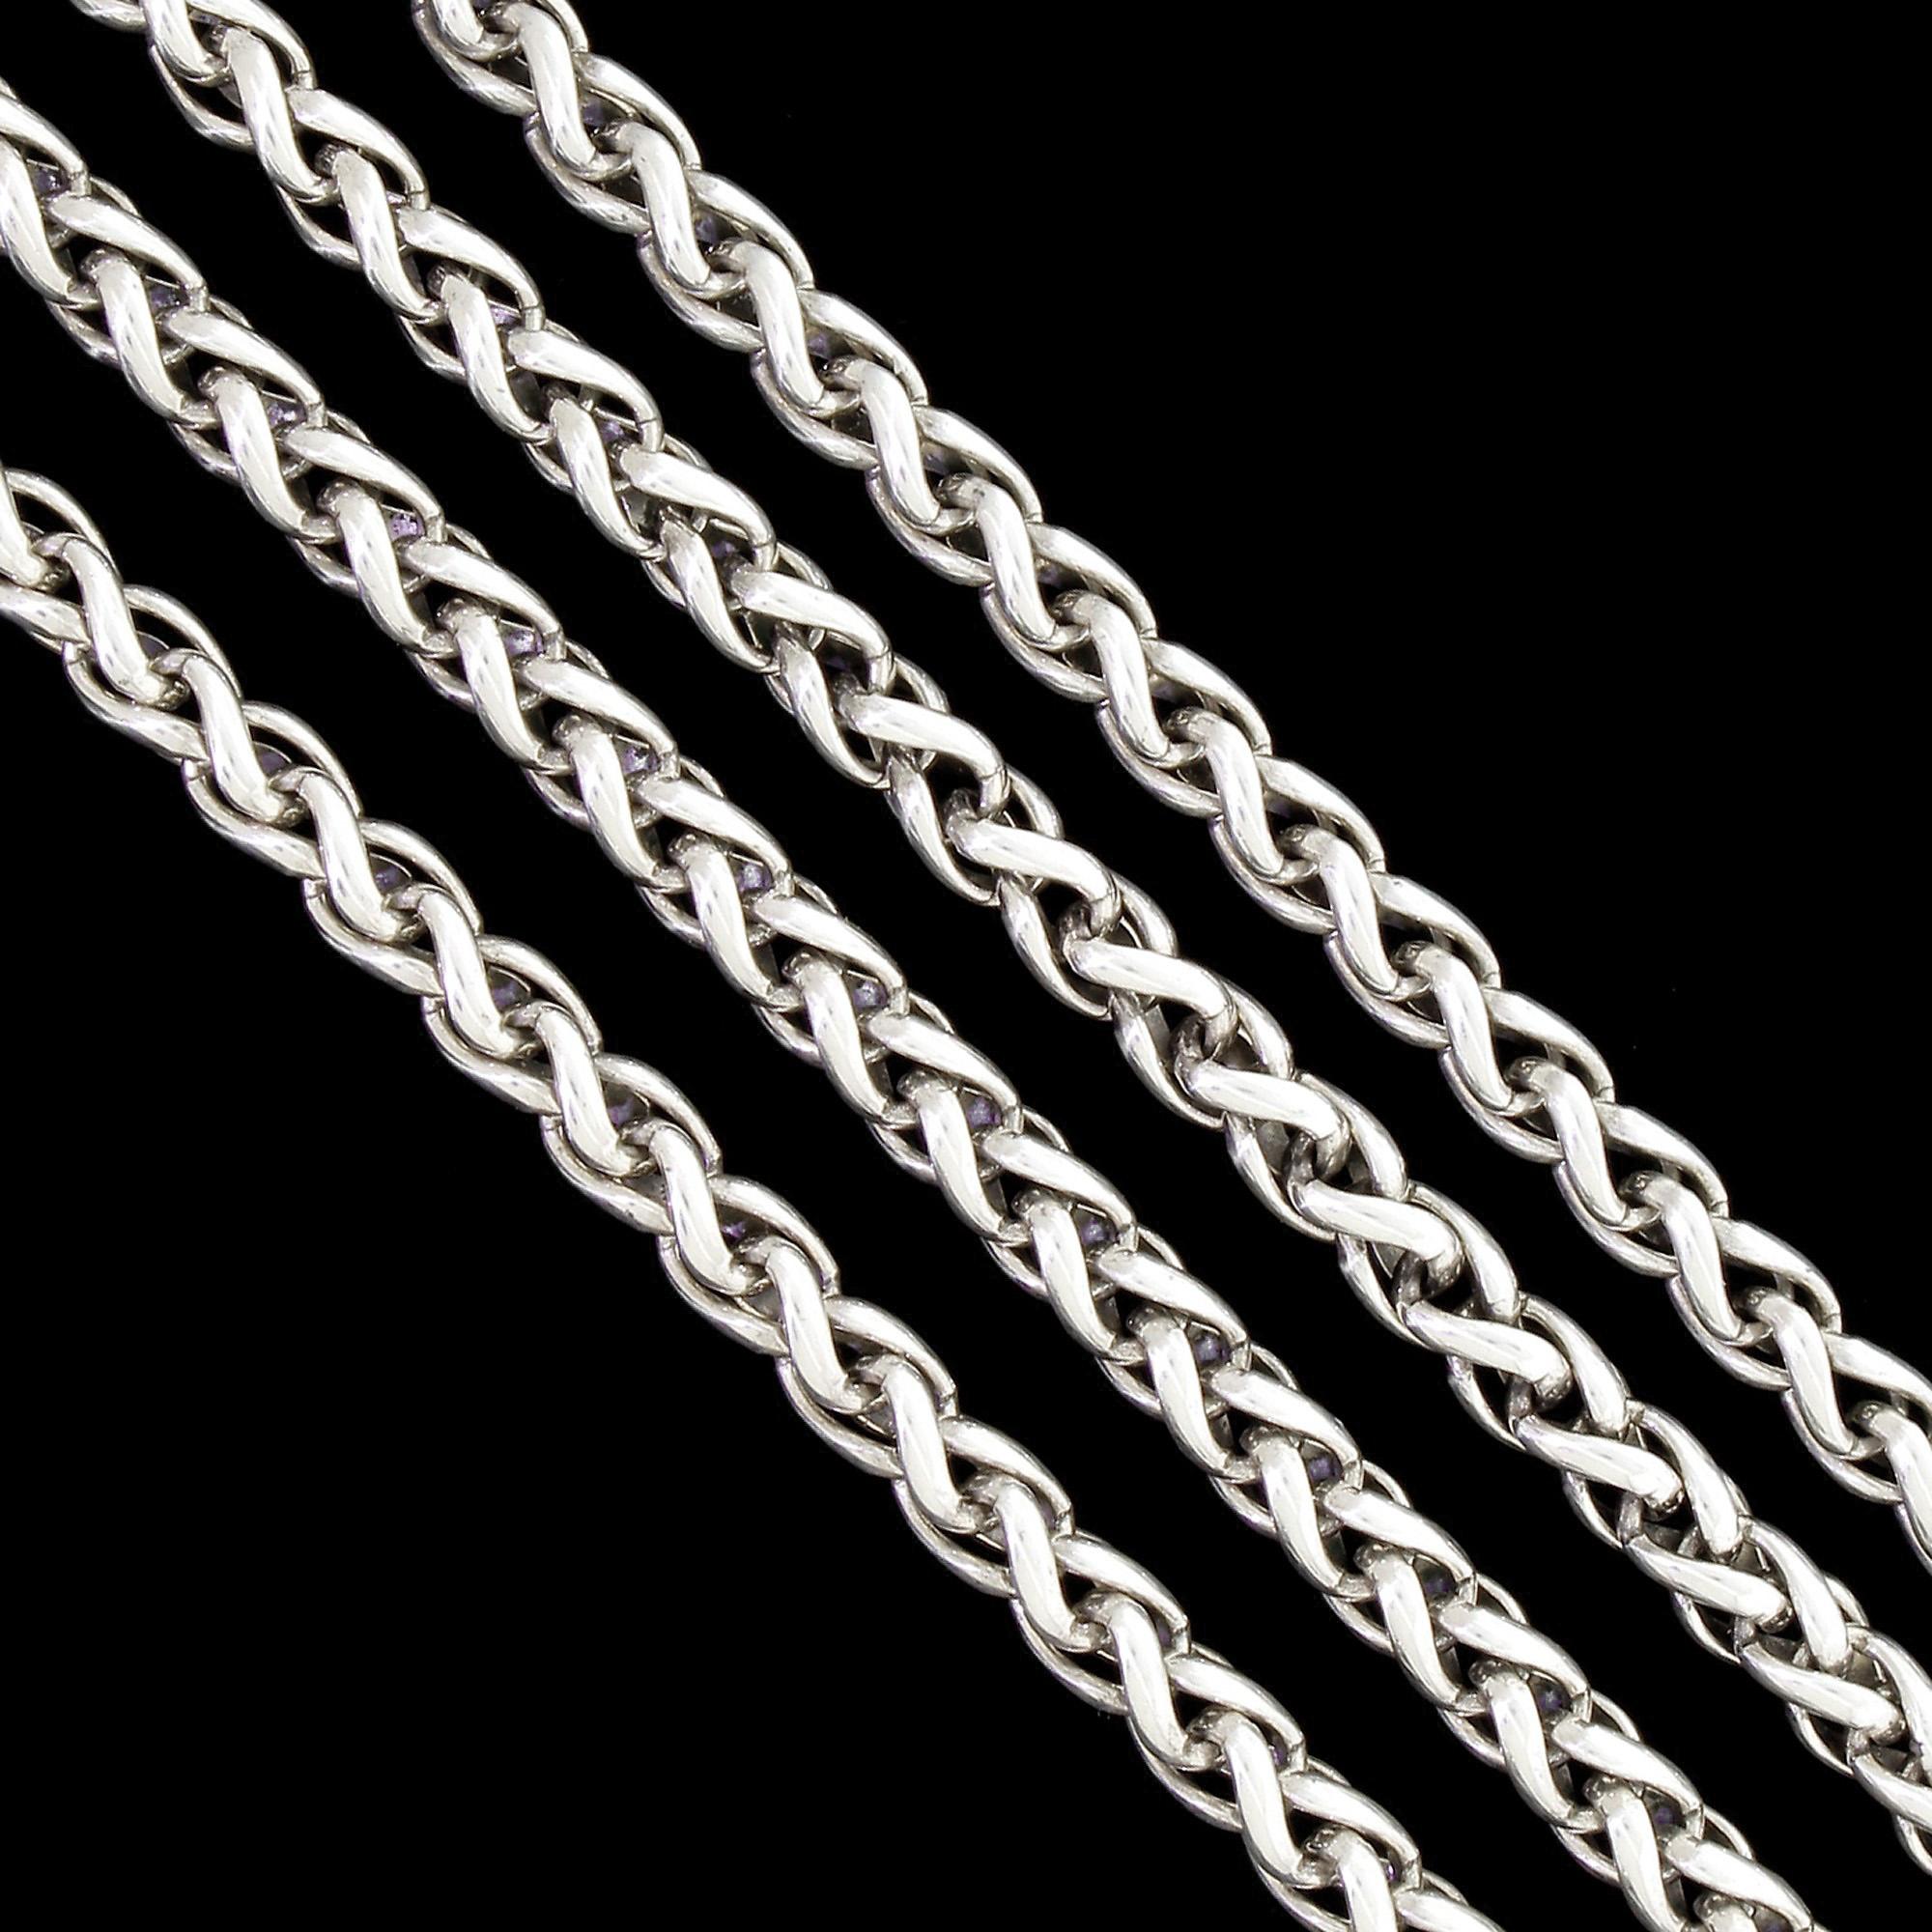 Stylish and elegant David Yurman sterling silver wheat chain rope necklace measuring 26 inches length. This iconic design features 4mm diameter links that are tightly woven and expertly articulated for comfort and flexibility. Could be worn by